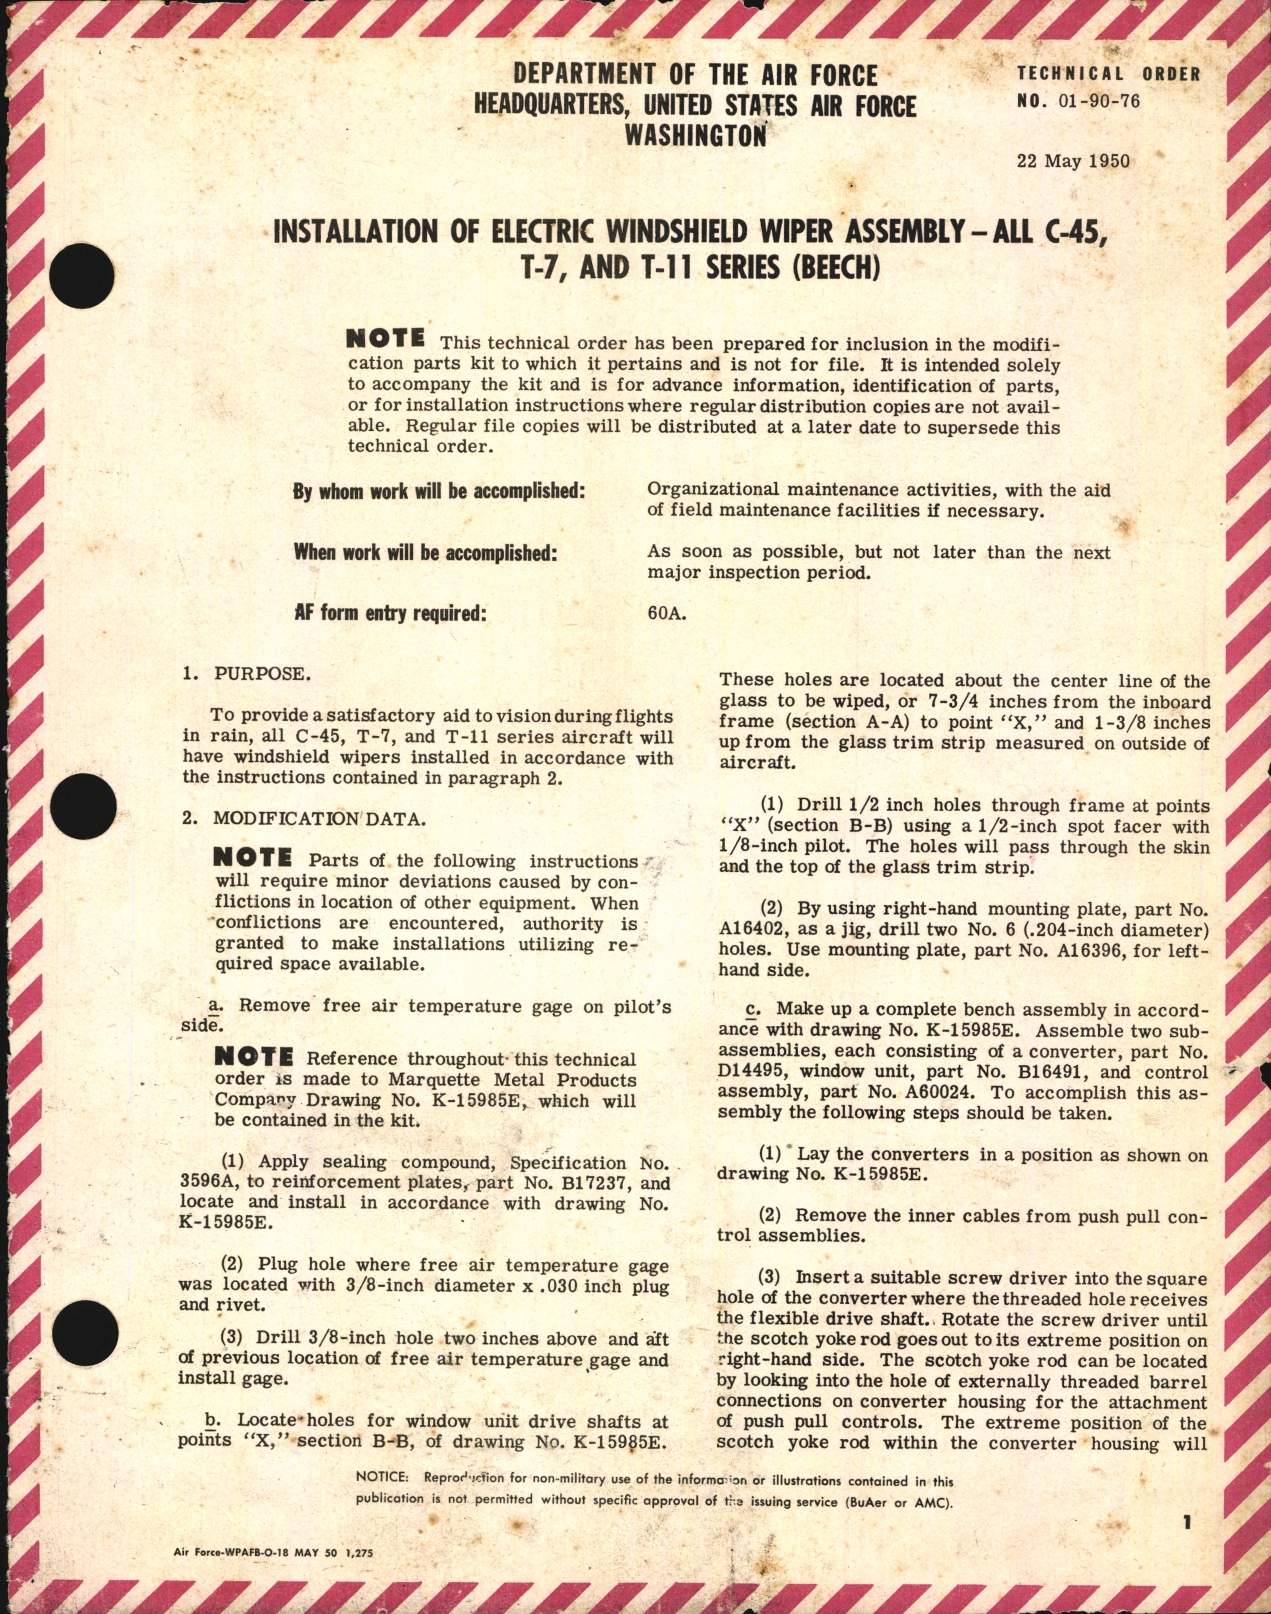 Sample page 1 from AirCorps Library document: Installation of Electric Windshield Wiper Assembly for All C-45, T-7, and T-11 Series